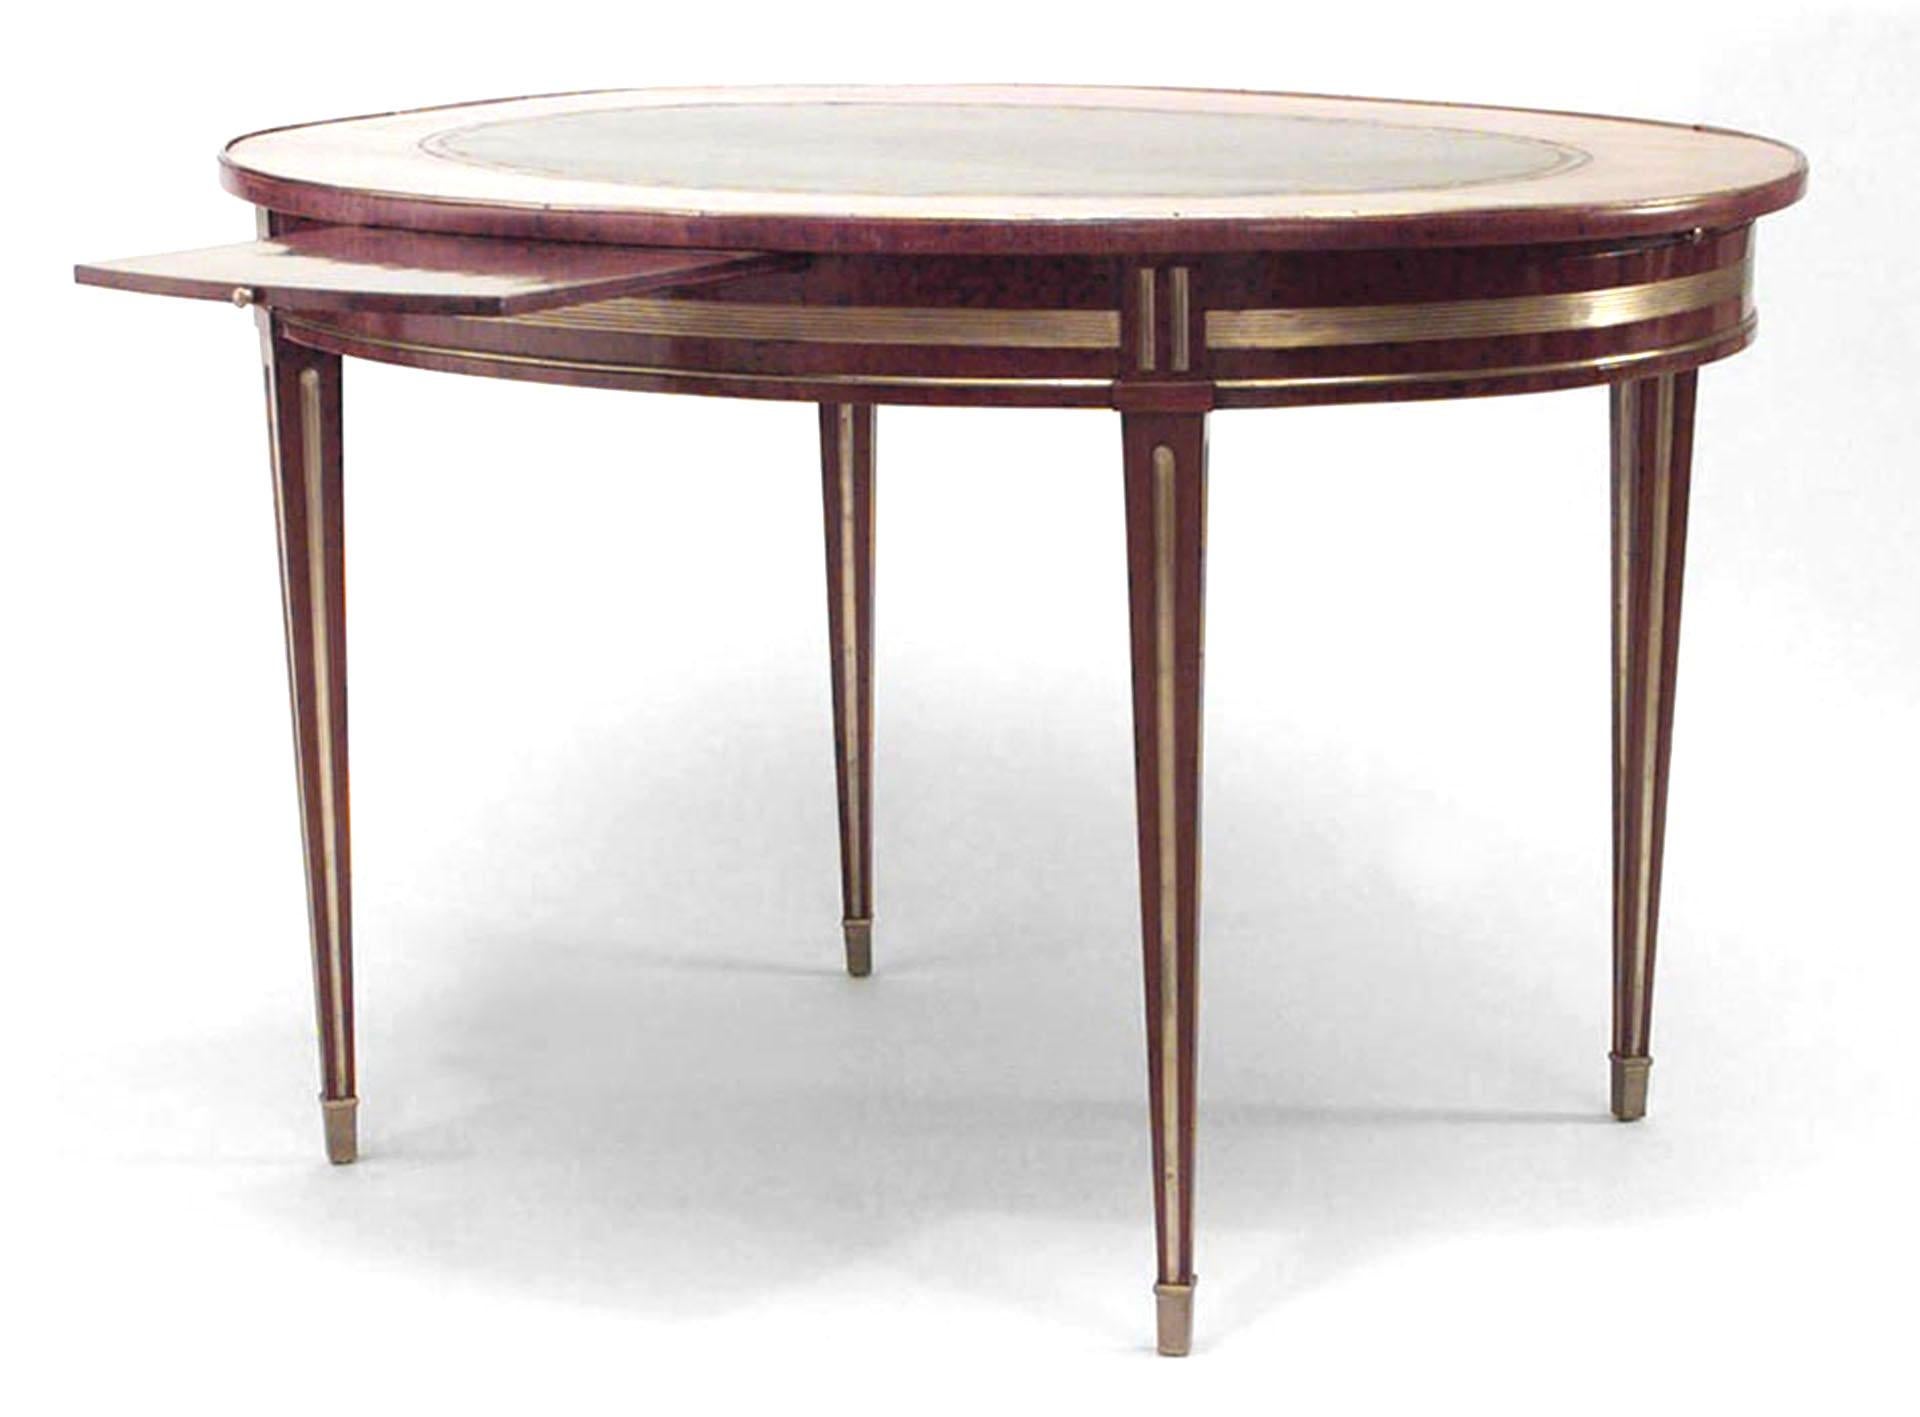 Russian Neoclassic (late 18th/early 19th Century) brass mounted mahogany center table with tulipwood banded black leather inset oval top over 4 slides on fluted legs.
